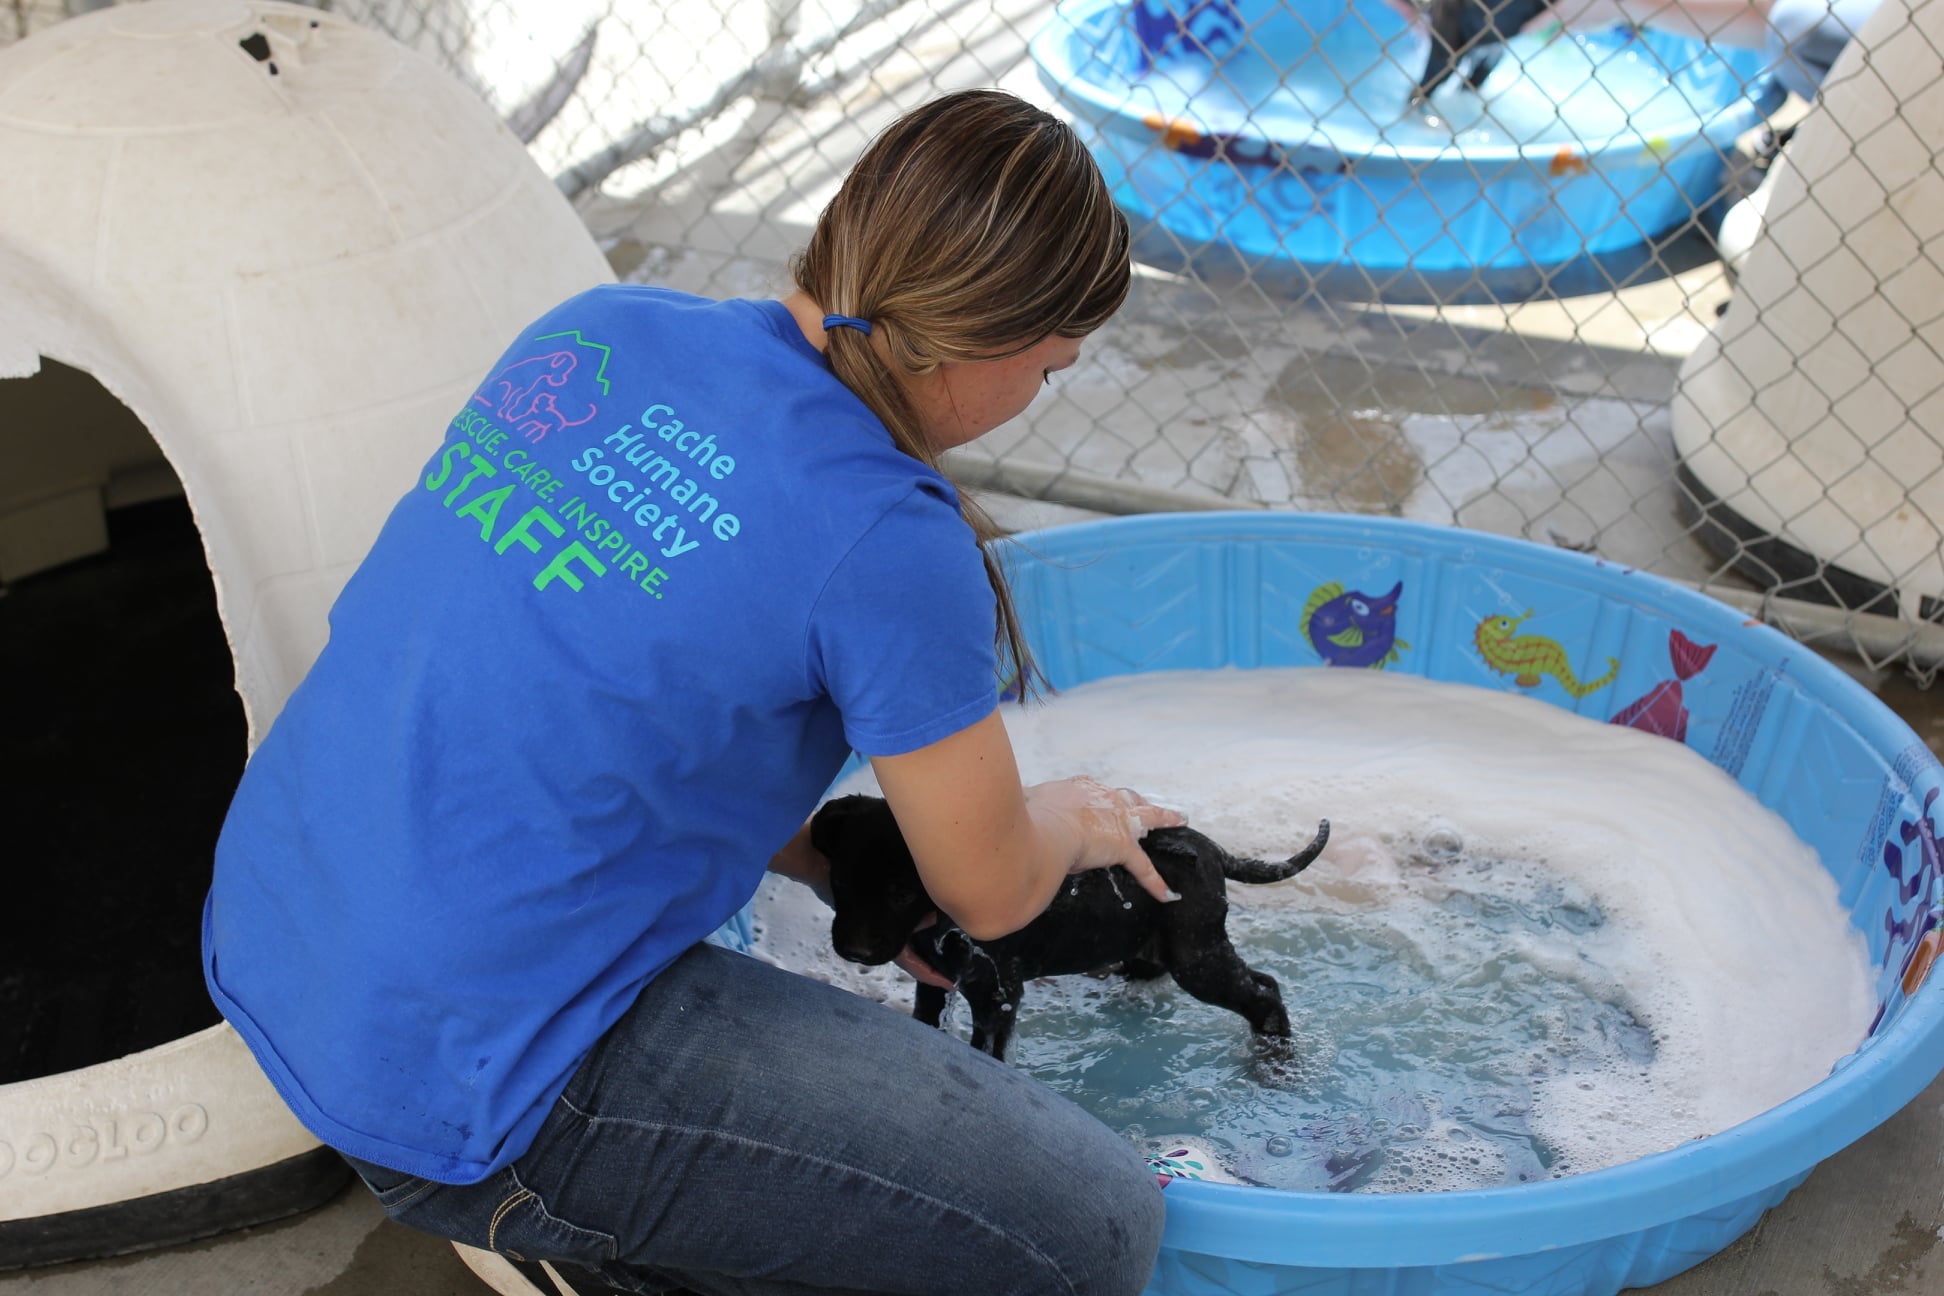 Cache Hume Society employee washing a puppy in a kiddie pool.